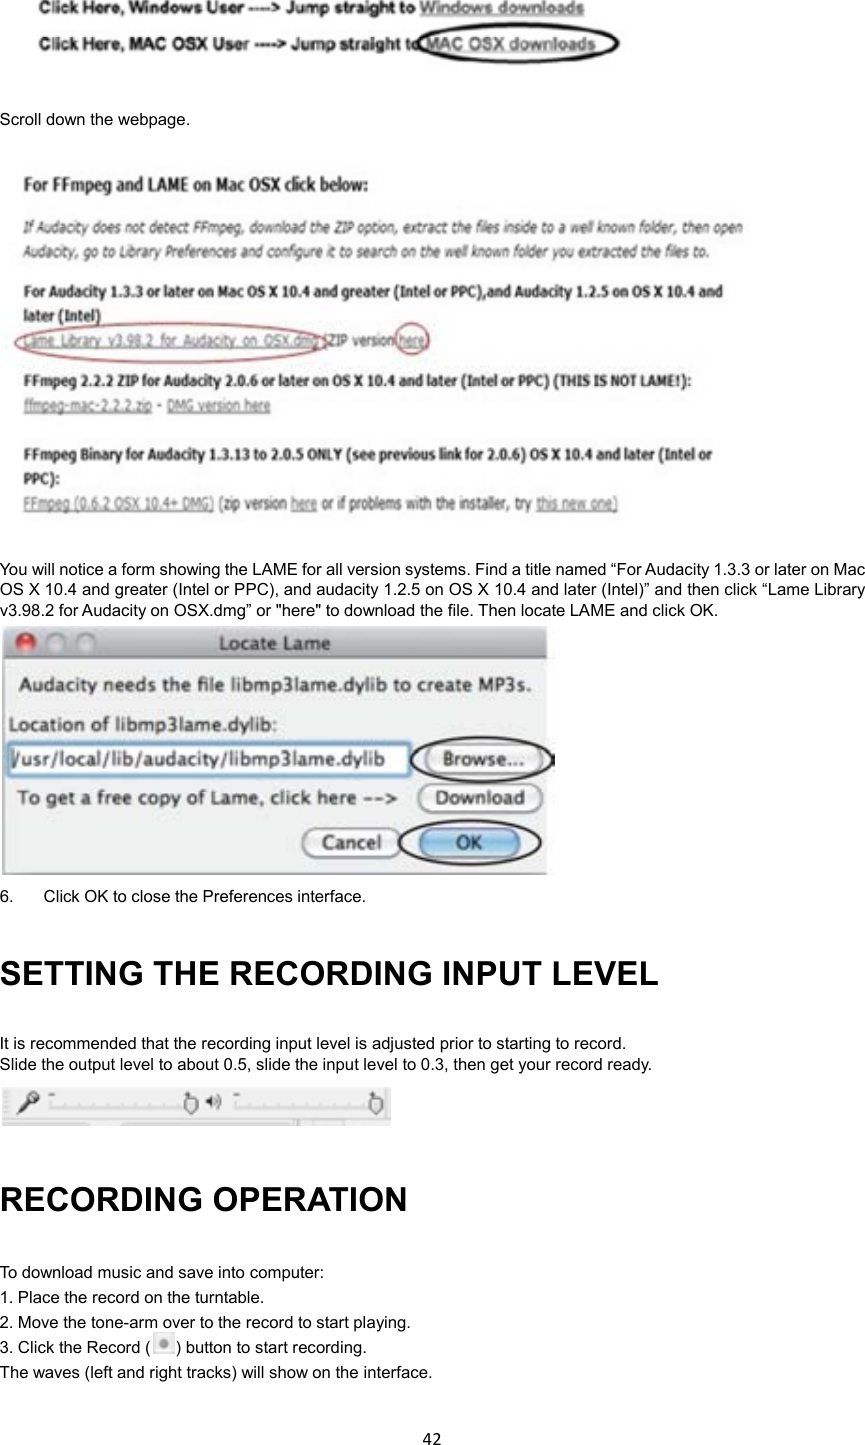 42     Scroll down the webpage.  You will notice a form showing the LAME for all version systems. Find a title named “For Audacity 1.3.3 or later on Mac OS X 10.4 and greater (Intel or PPC), and audacity 1.2.5 on OS X 10.4 and later (Intel)” and then click “Lame Library v3.98.2 for Audacity on OSX.dmg” or &quot;here&quot; to download the file. Then locate LAME and click OK.  6.  Click OK to close the Preferences interface. SETTING THE RECORDING INPUT LEVEL It is recommended that the recording input level is adjusted prior to starting to record. Slide the output level to about 0.5, slide the input level to 0.3, then get your record ready.  RECORDING OPERATION To download music and save into computer: 1. Place the record on the turntable. 2. Move the tone-arm over to the record to start playing. 3. Click the Record ( ) button to start recording. The waves (left and right tracks) will show on the interface.  